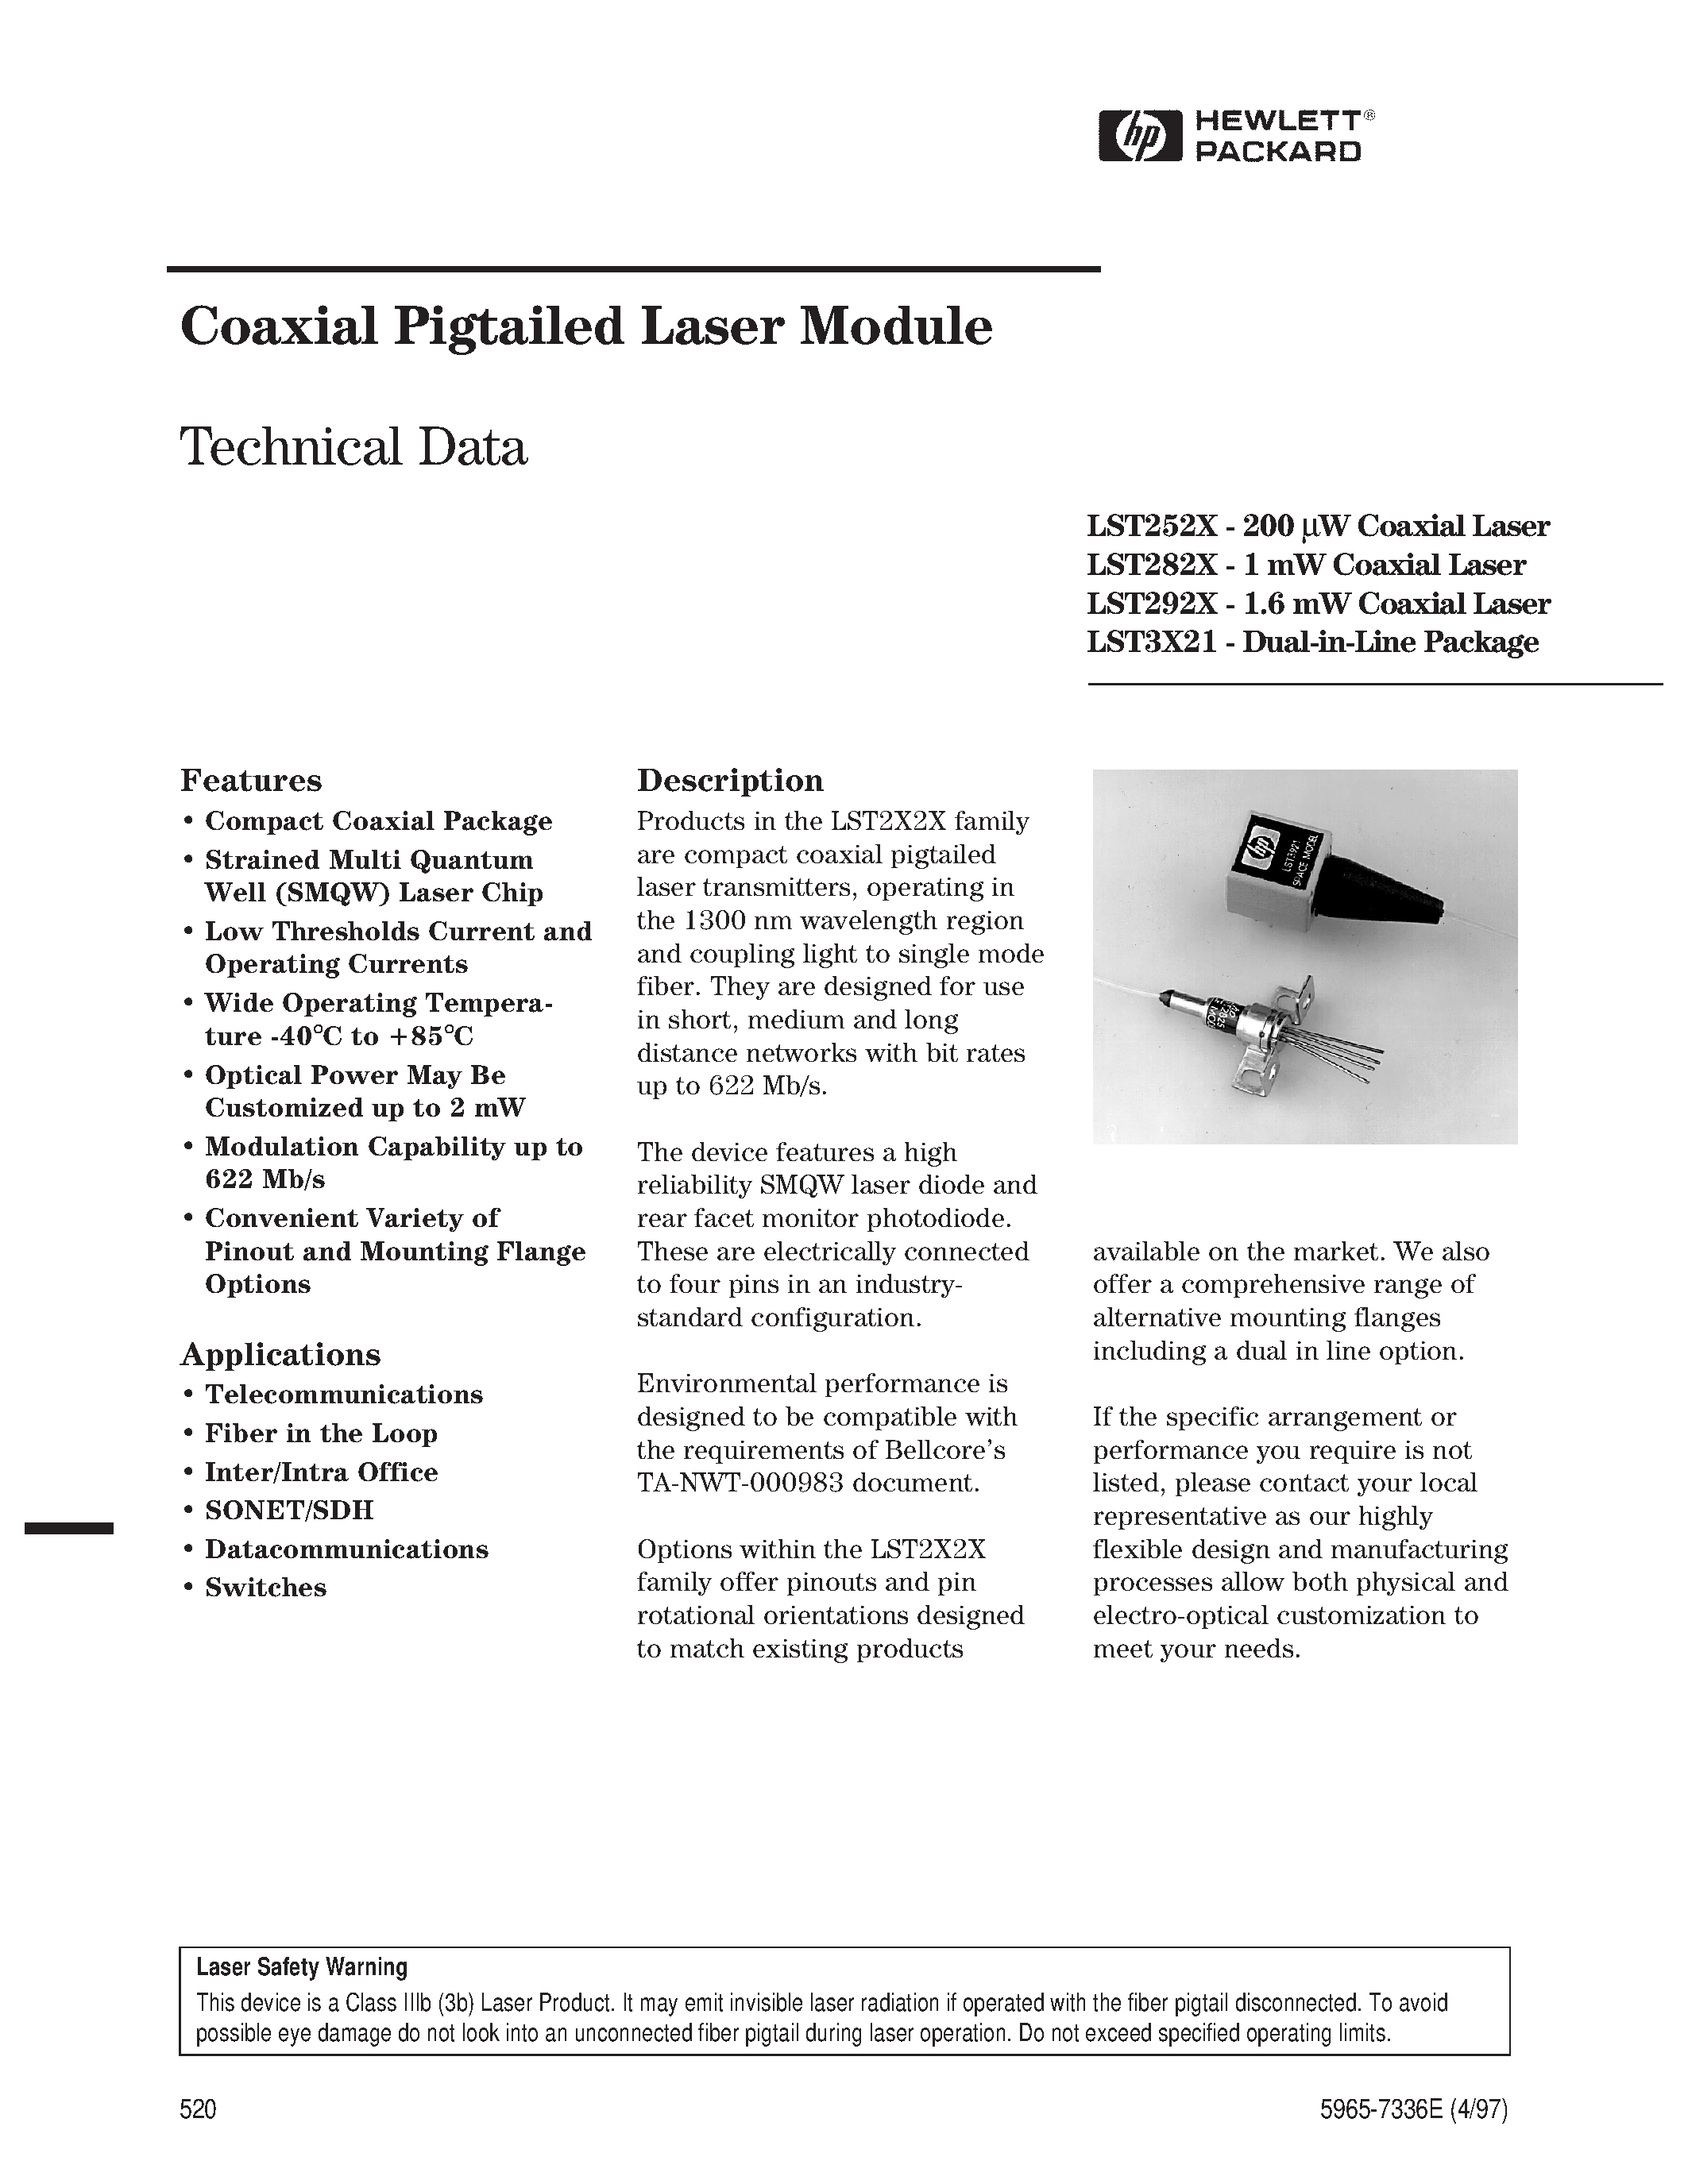 Даташит LST2925-S4-T-SF - Coaxial Pigtailed Laser Module страница 1